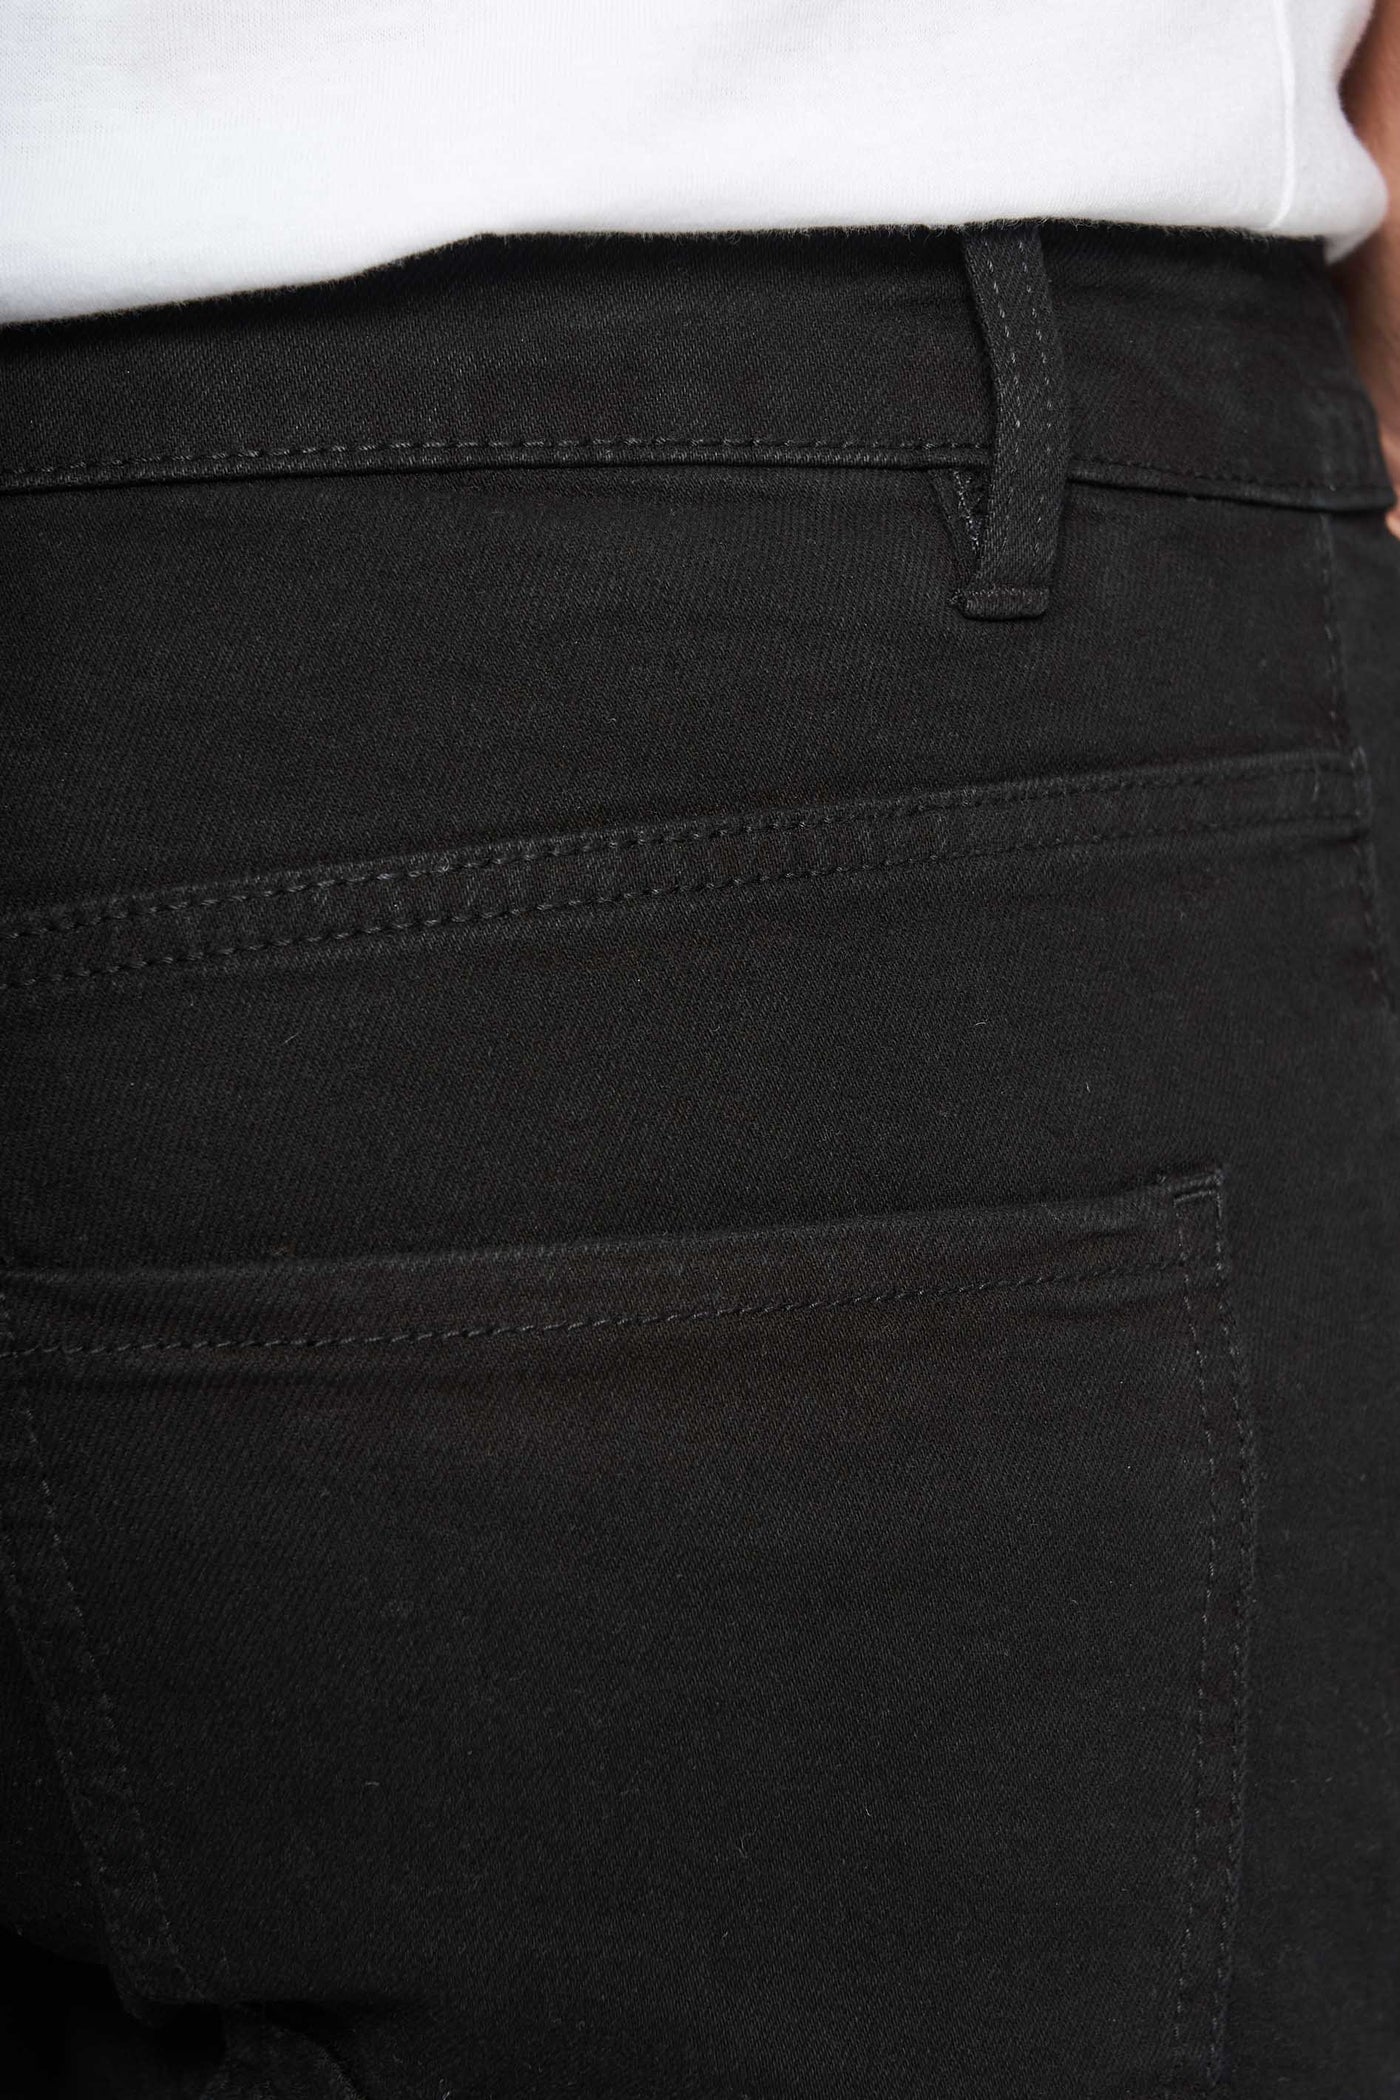 Jeans - Black Overdyed